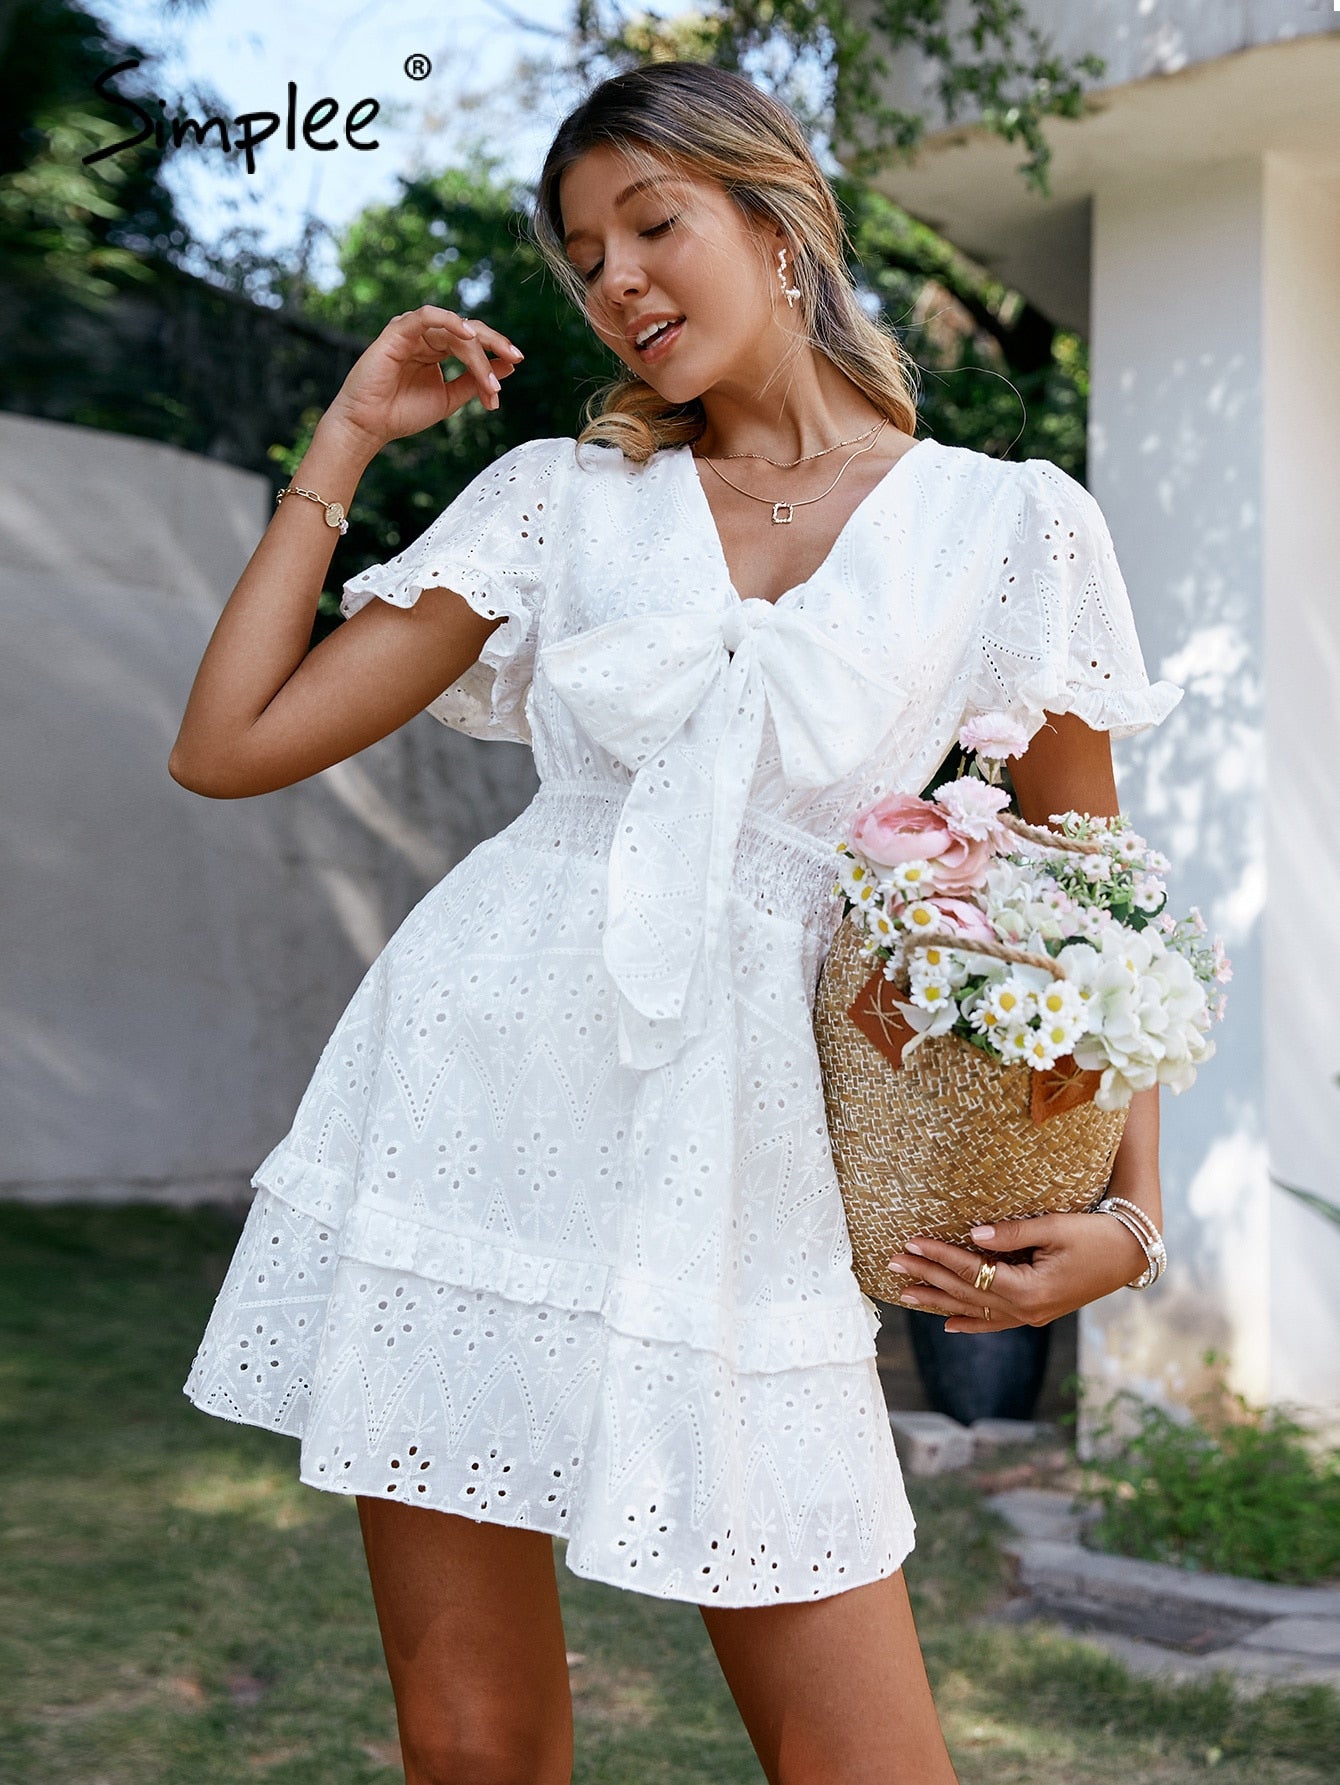 Mojoyce Cotton hollow out puff short sleeve women summer dress Holiday white bow beach mini sundress  A-line 2022 mujer vestidos